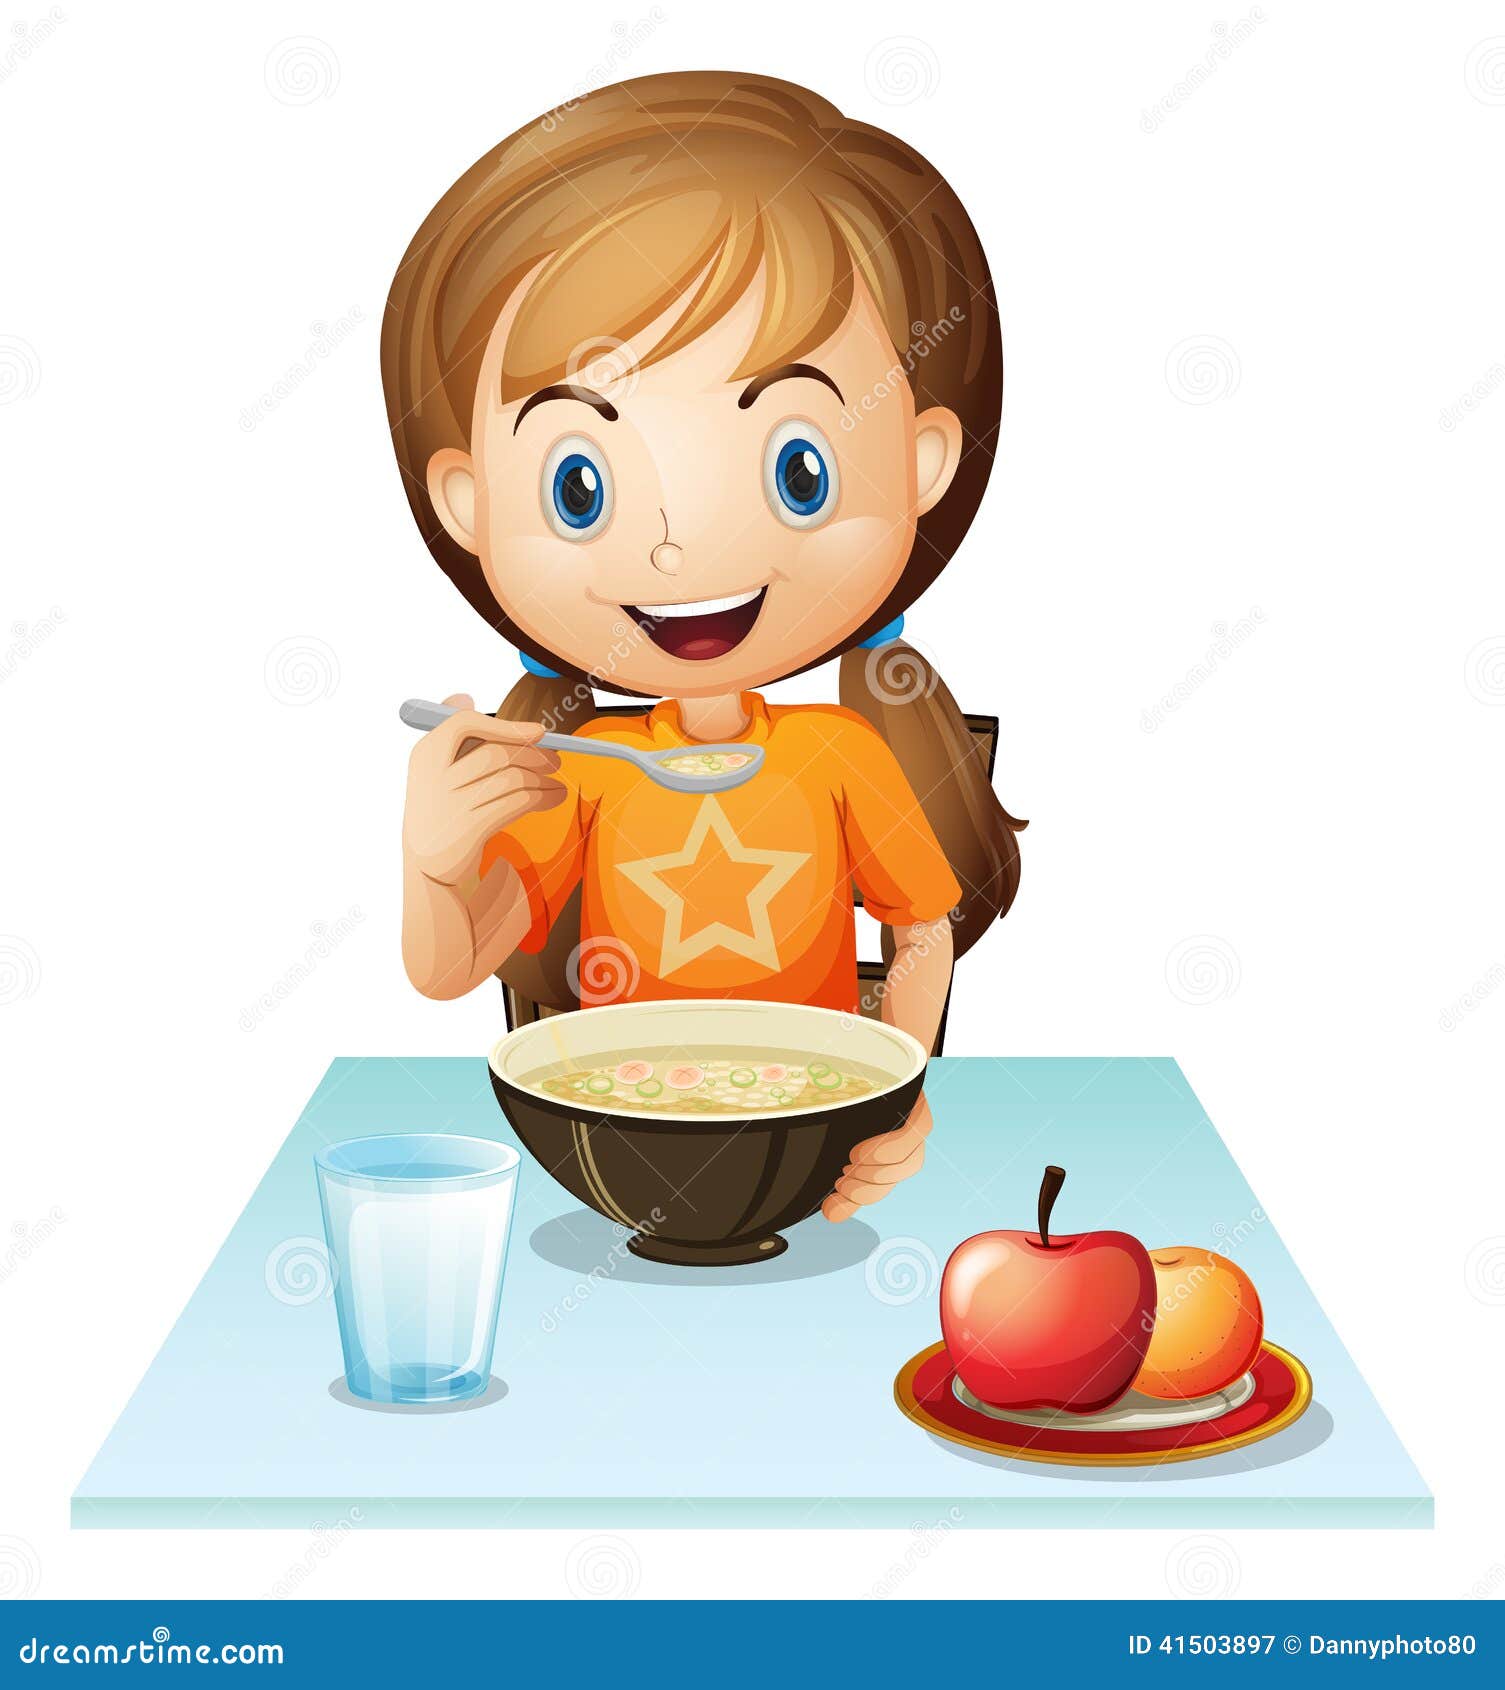 clipart of a girl eating - photo #17